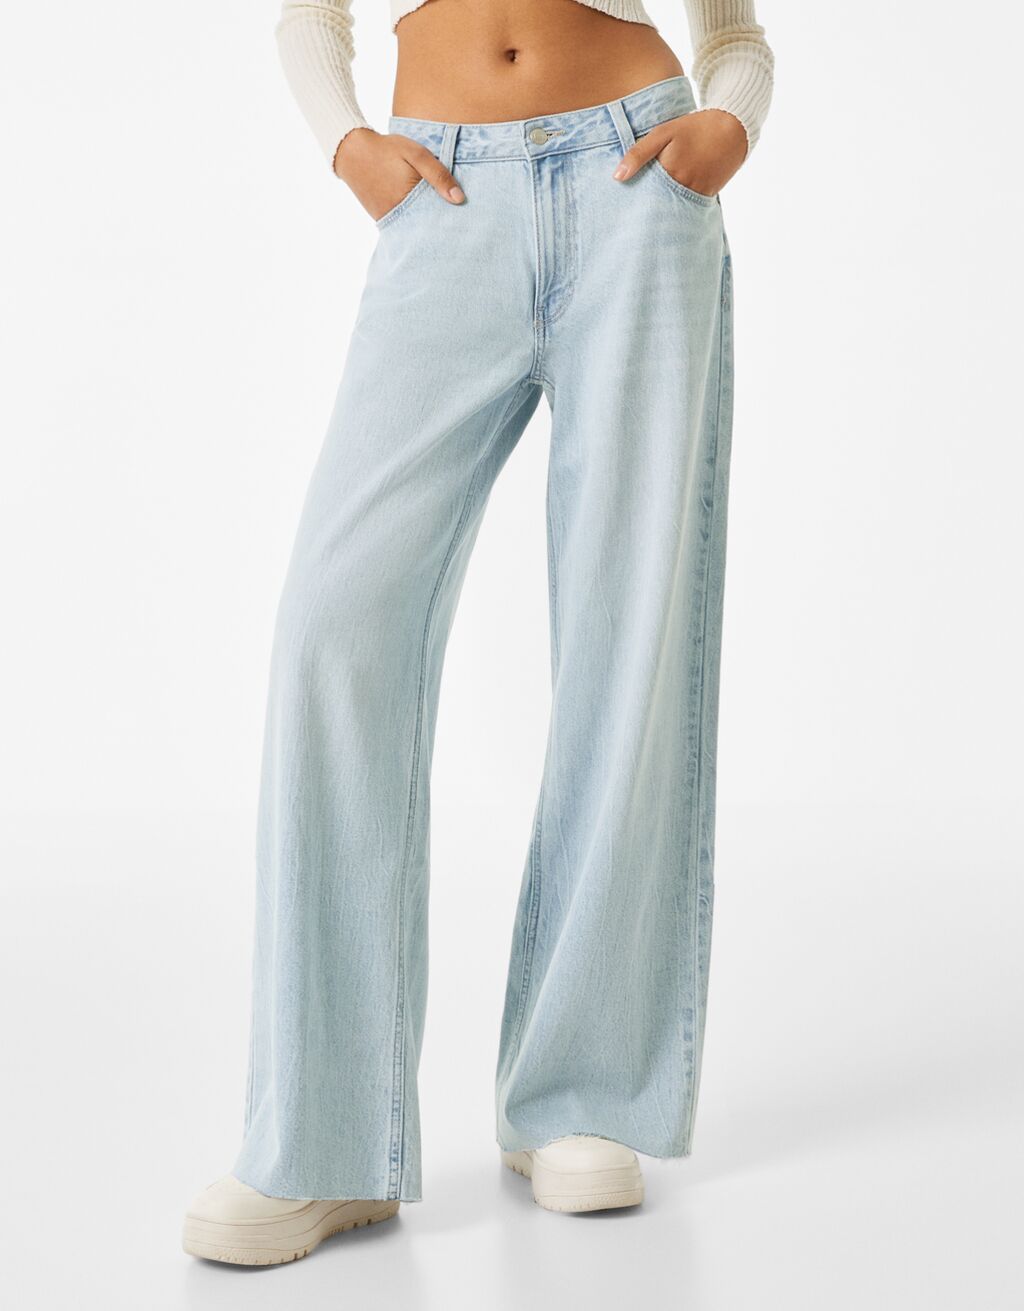 Low-rise baggy jeans